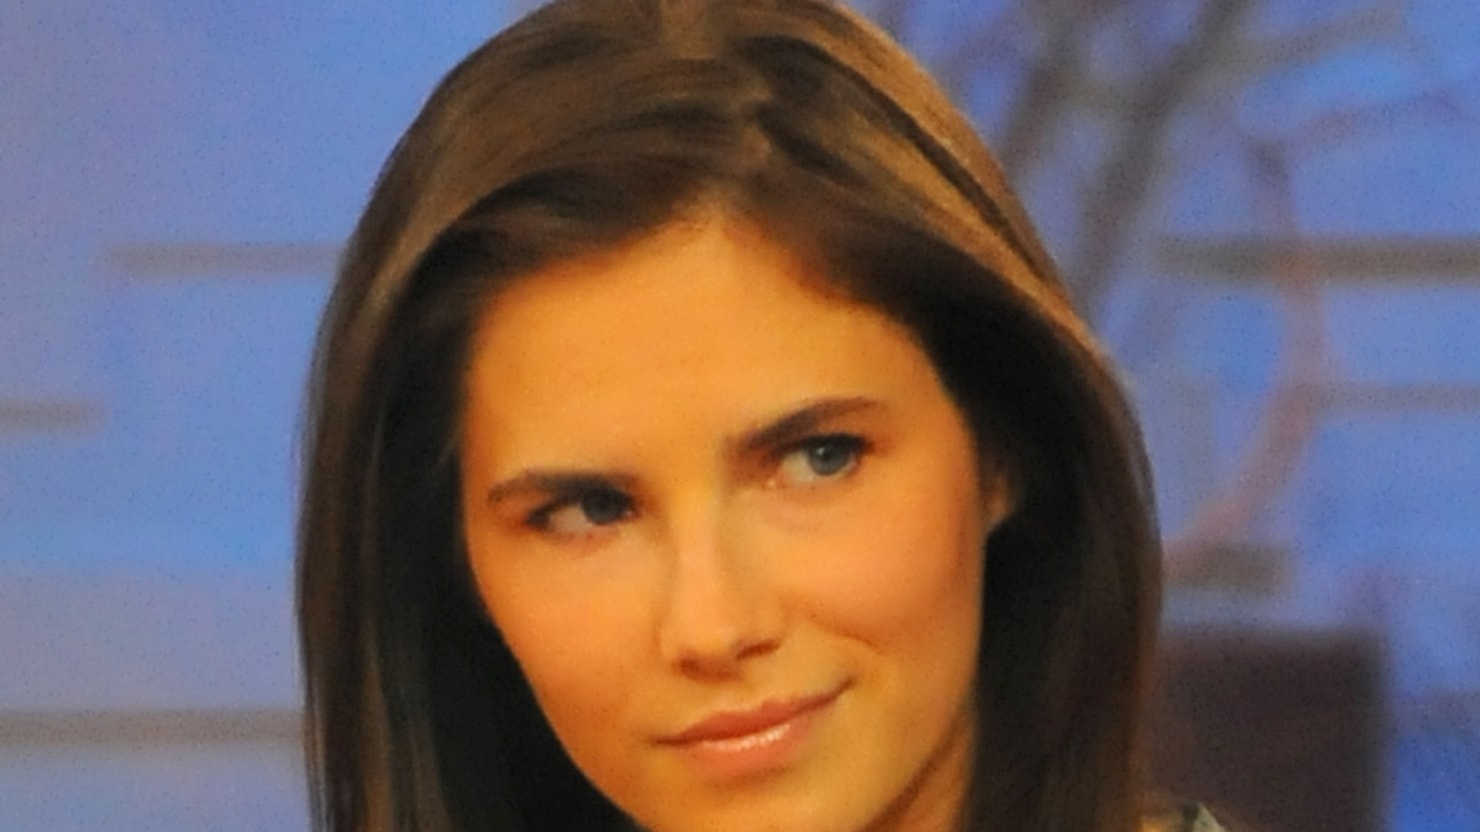 Porn Company Wants Amanda Knox To Star In Adult -5399